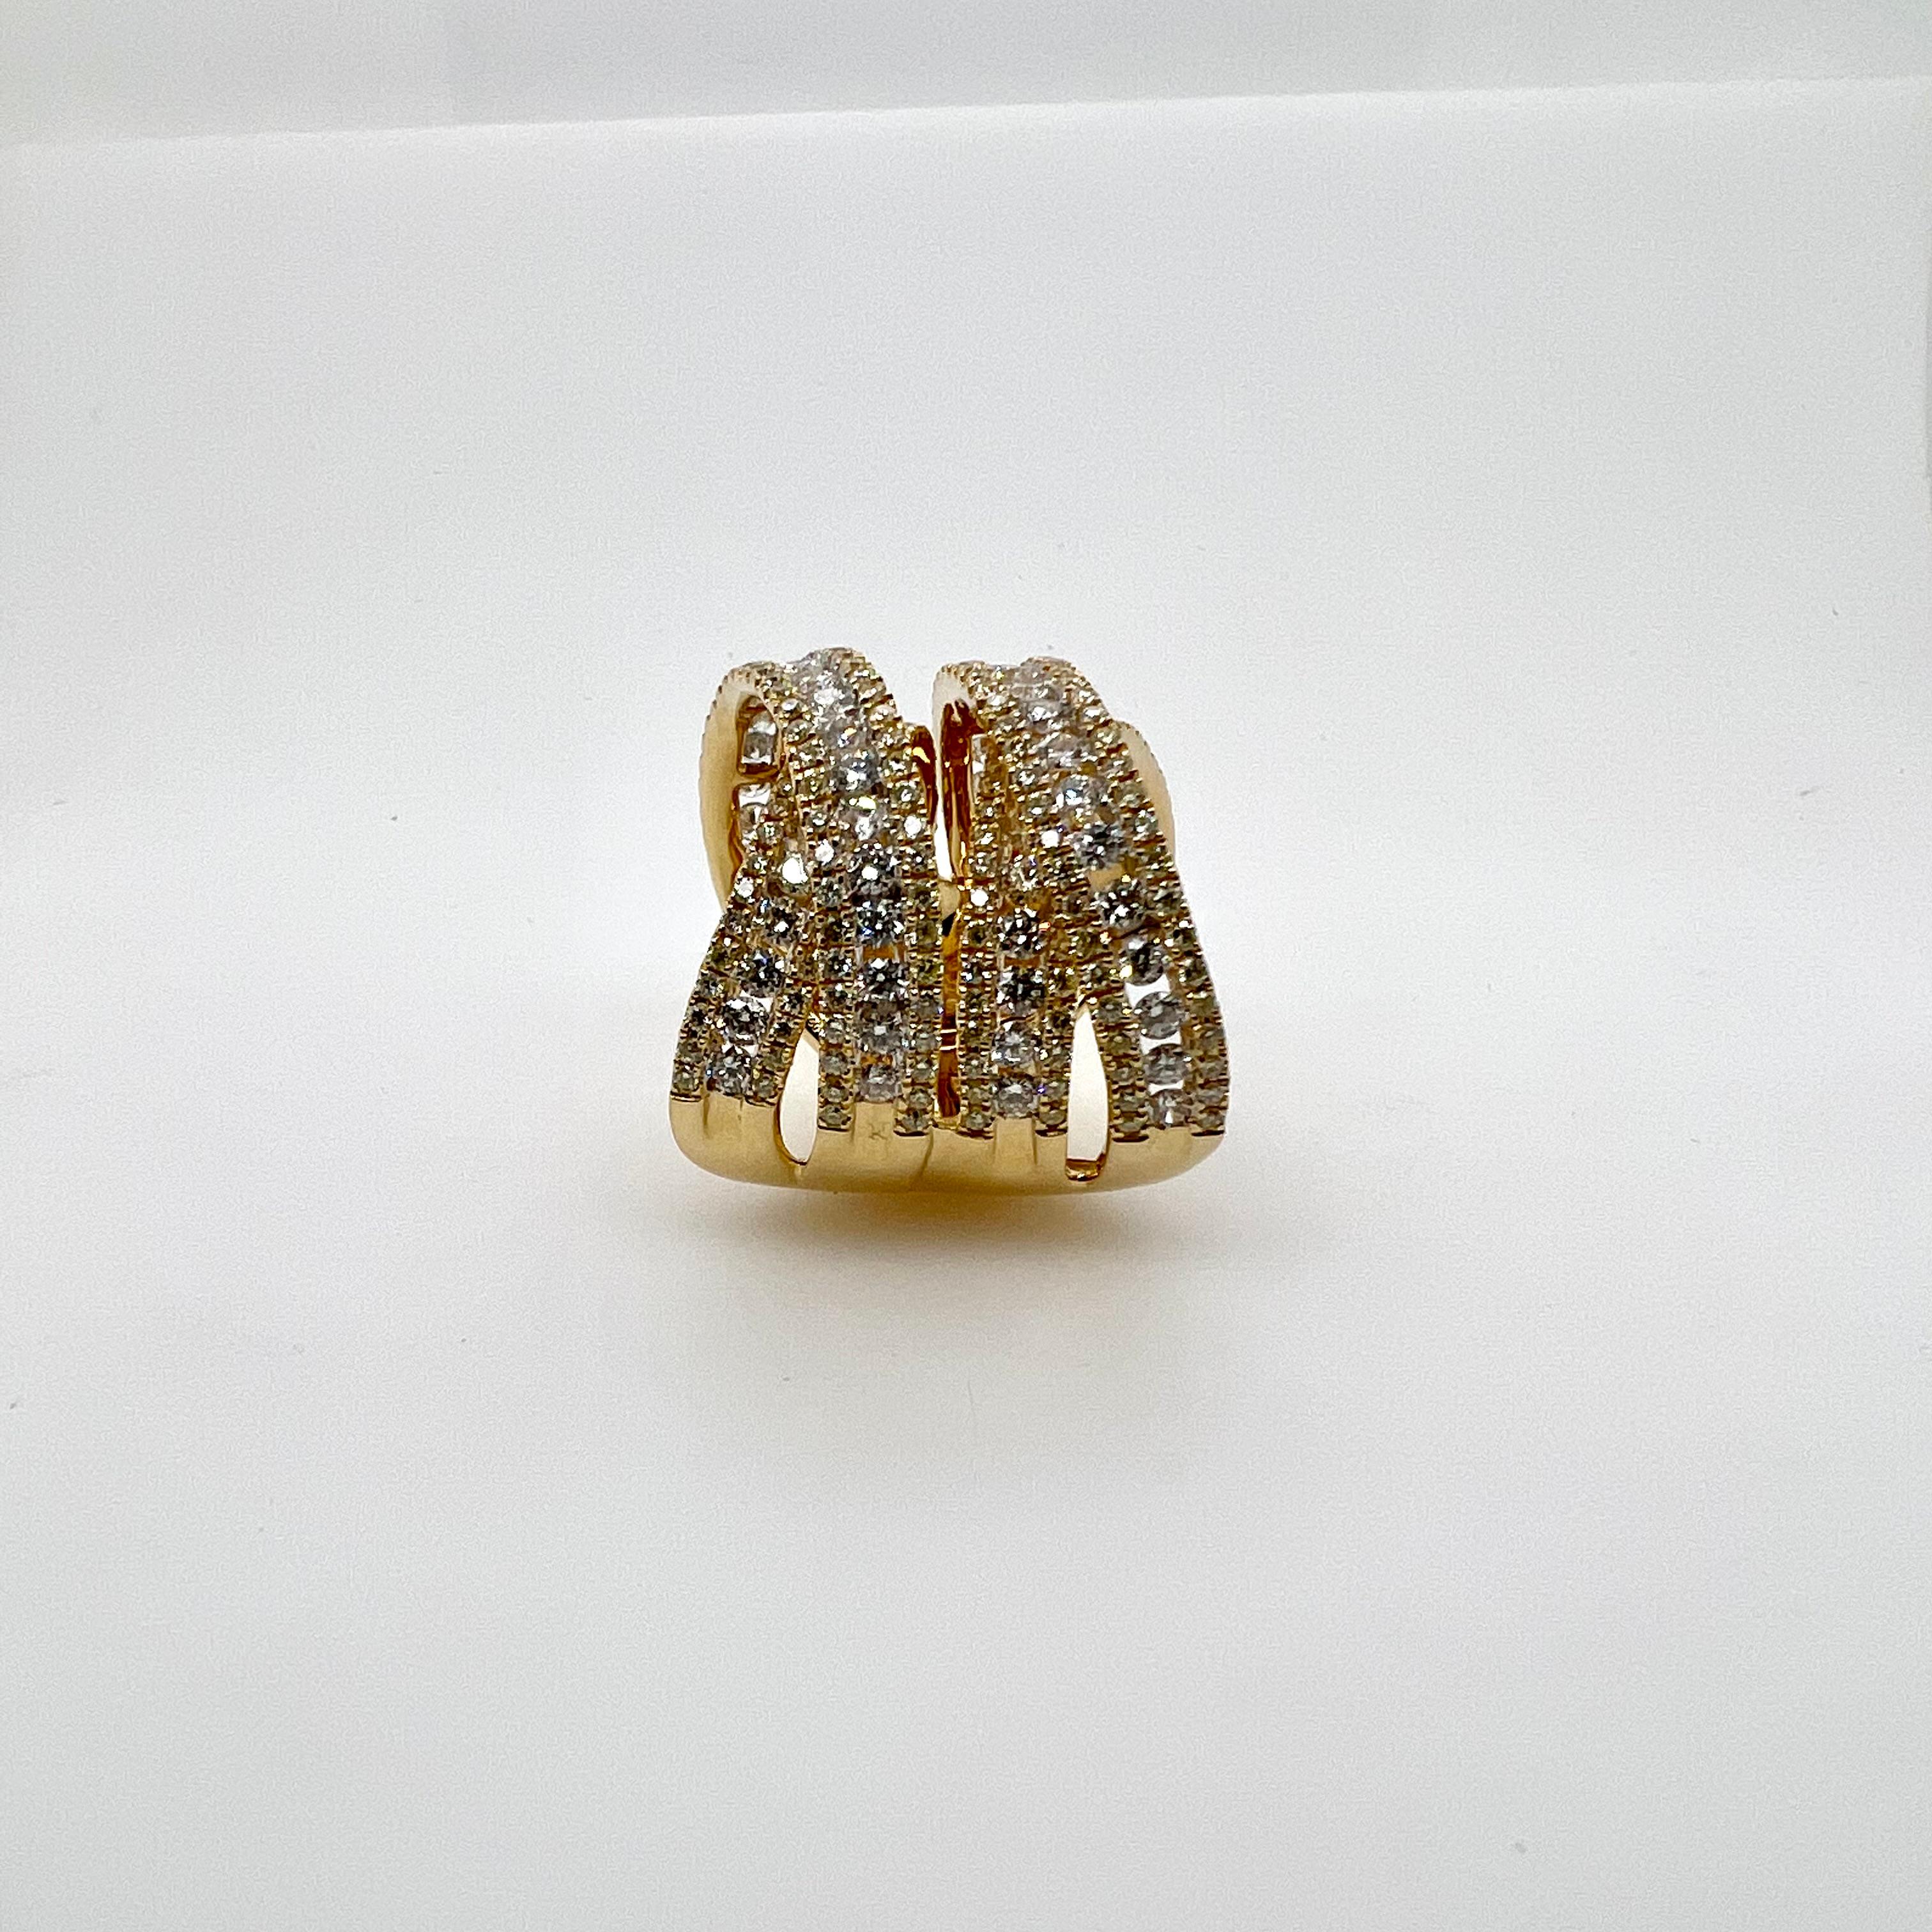 An amazing 4 row, wide diamond band made in 18k yellow gold that will surely gains everyone's attention!  This bold design has two overlapping motifs that surely accentuates the contemporary design!  The beautiful profile shows the two height levels